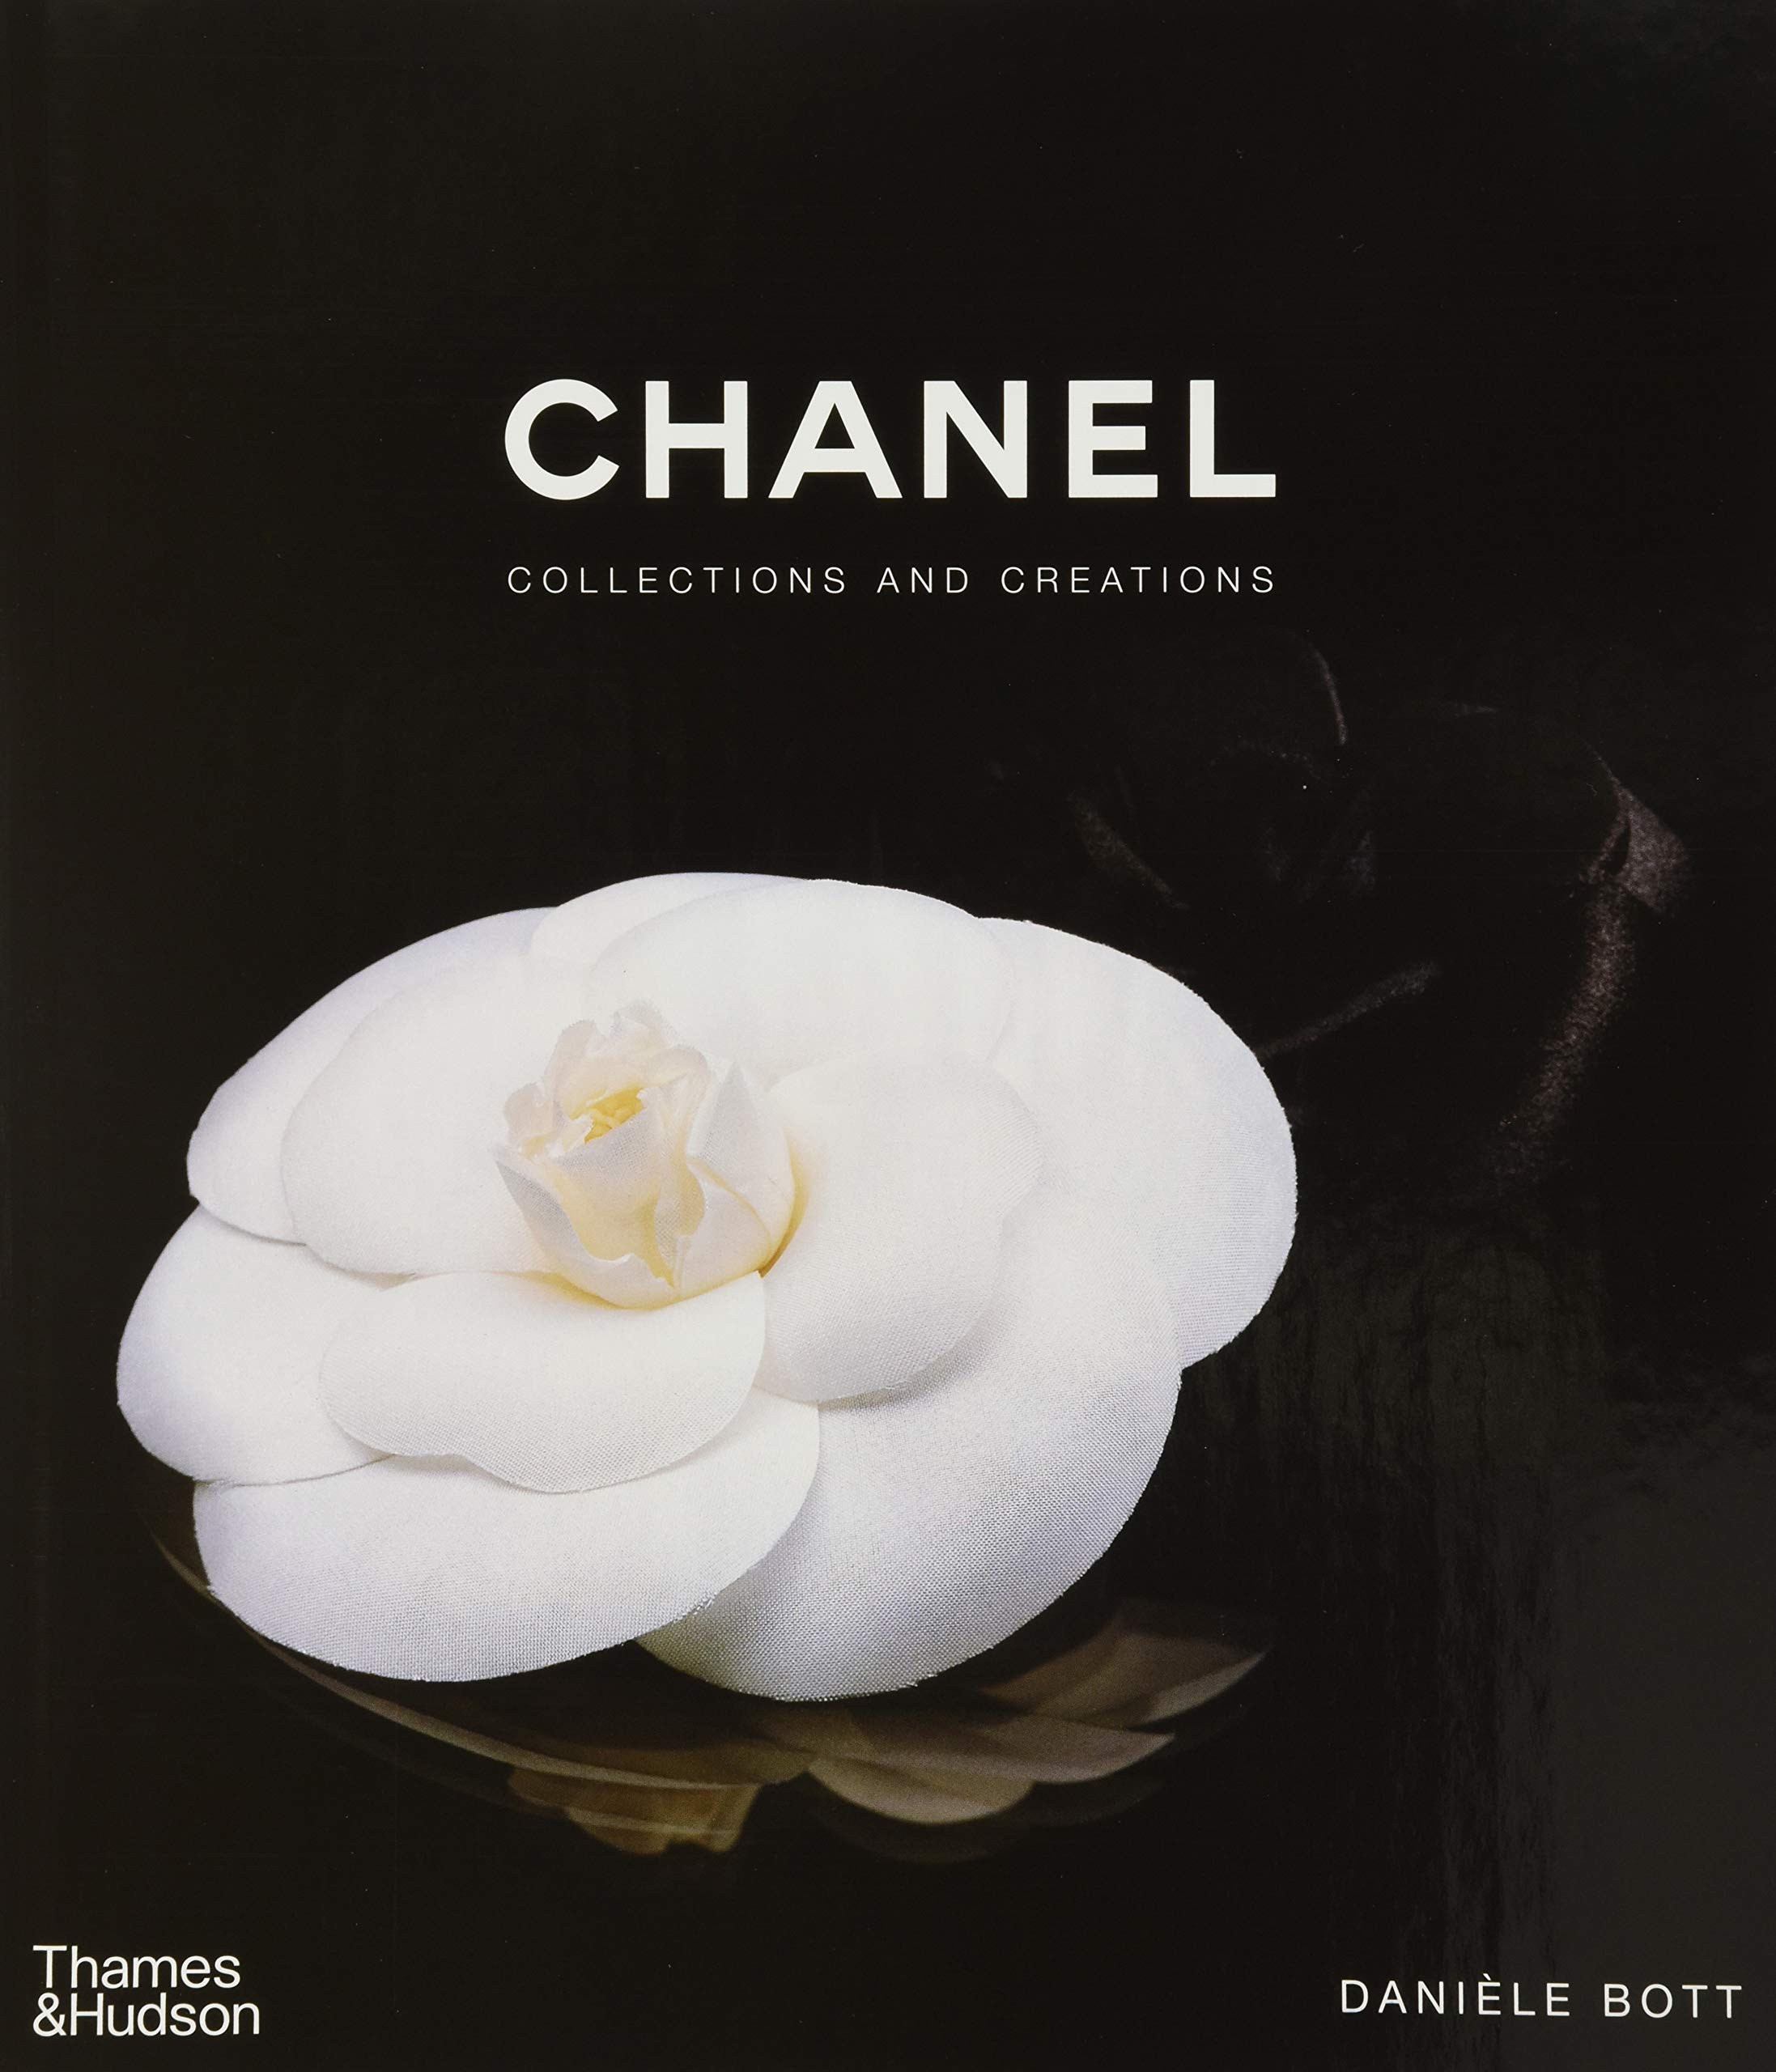 Chanel  Collections and Creations  ARTBOOK